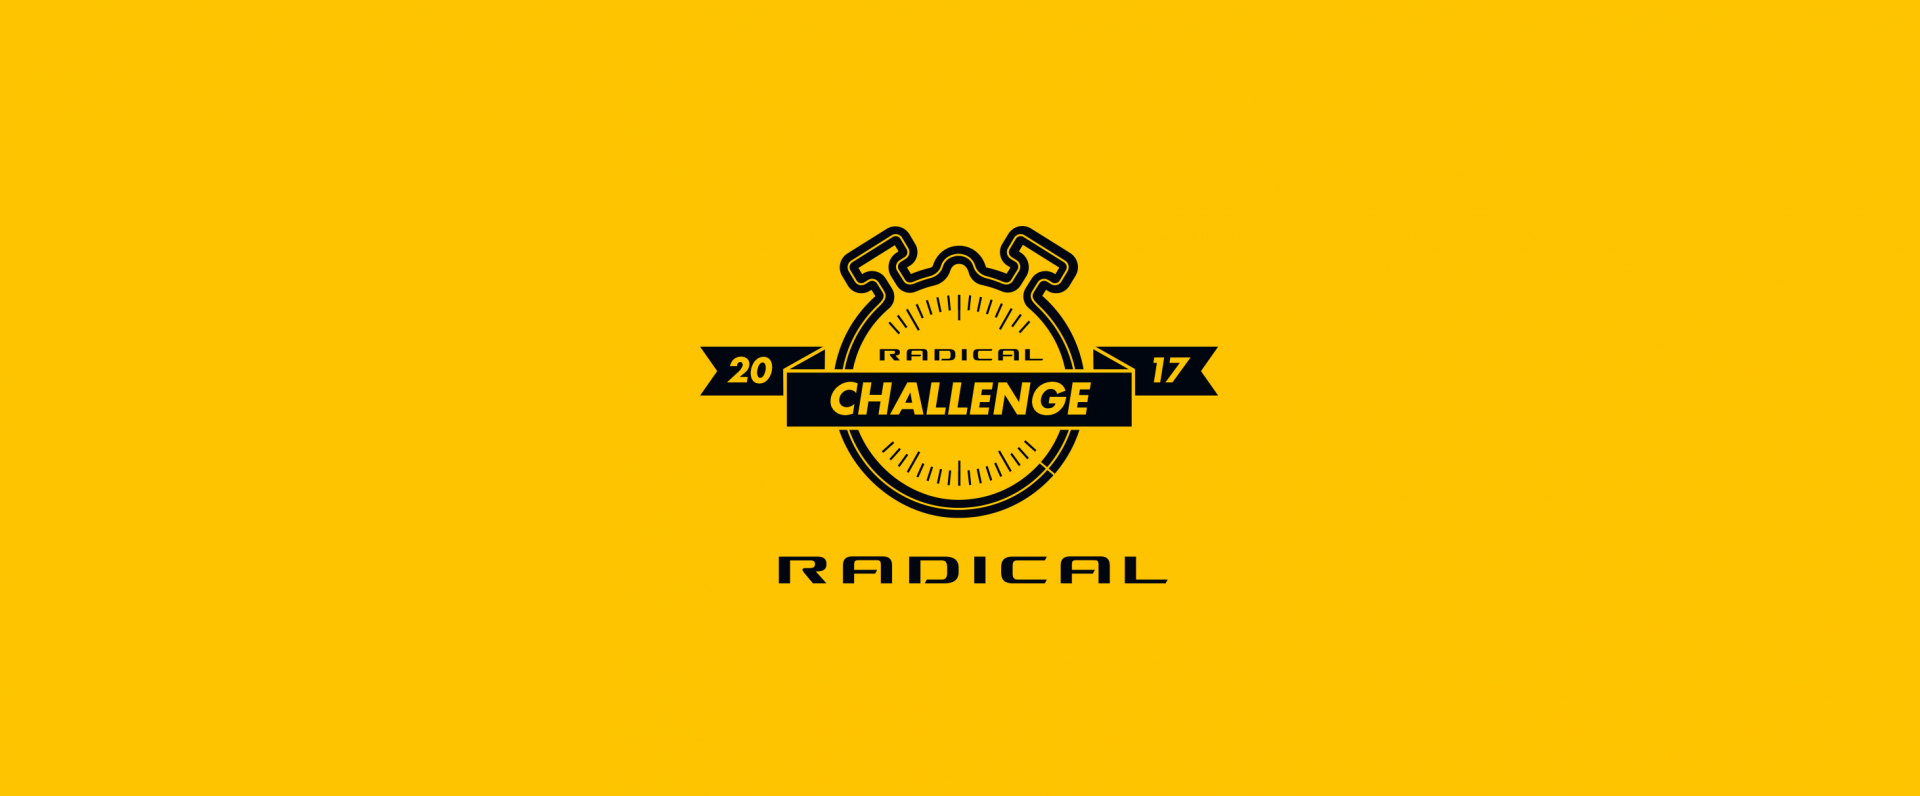 Radical Challenge Championship Set for Exciting 2017 Season Opener at Donington Park with Bumper Grid